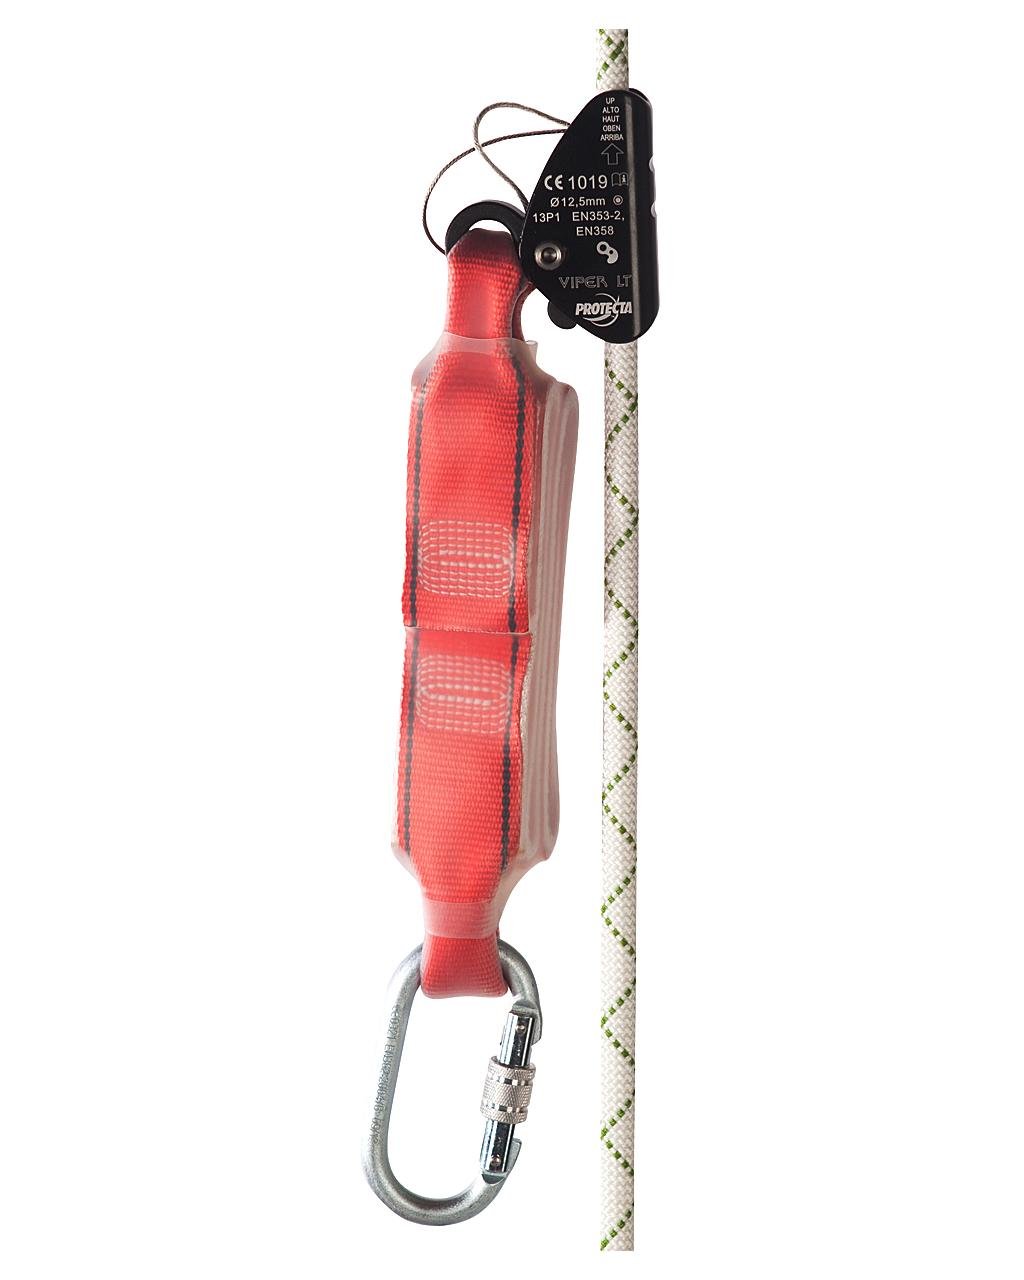 Rope Grab Viper LT AC4002 with Energy Absorber